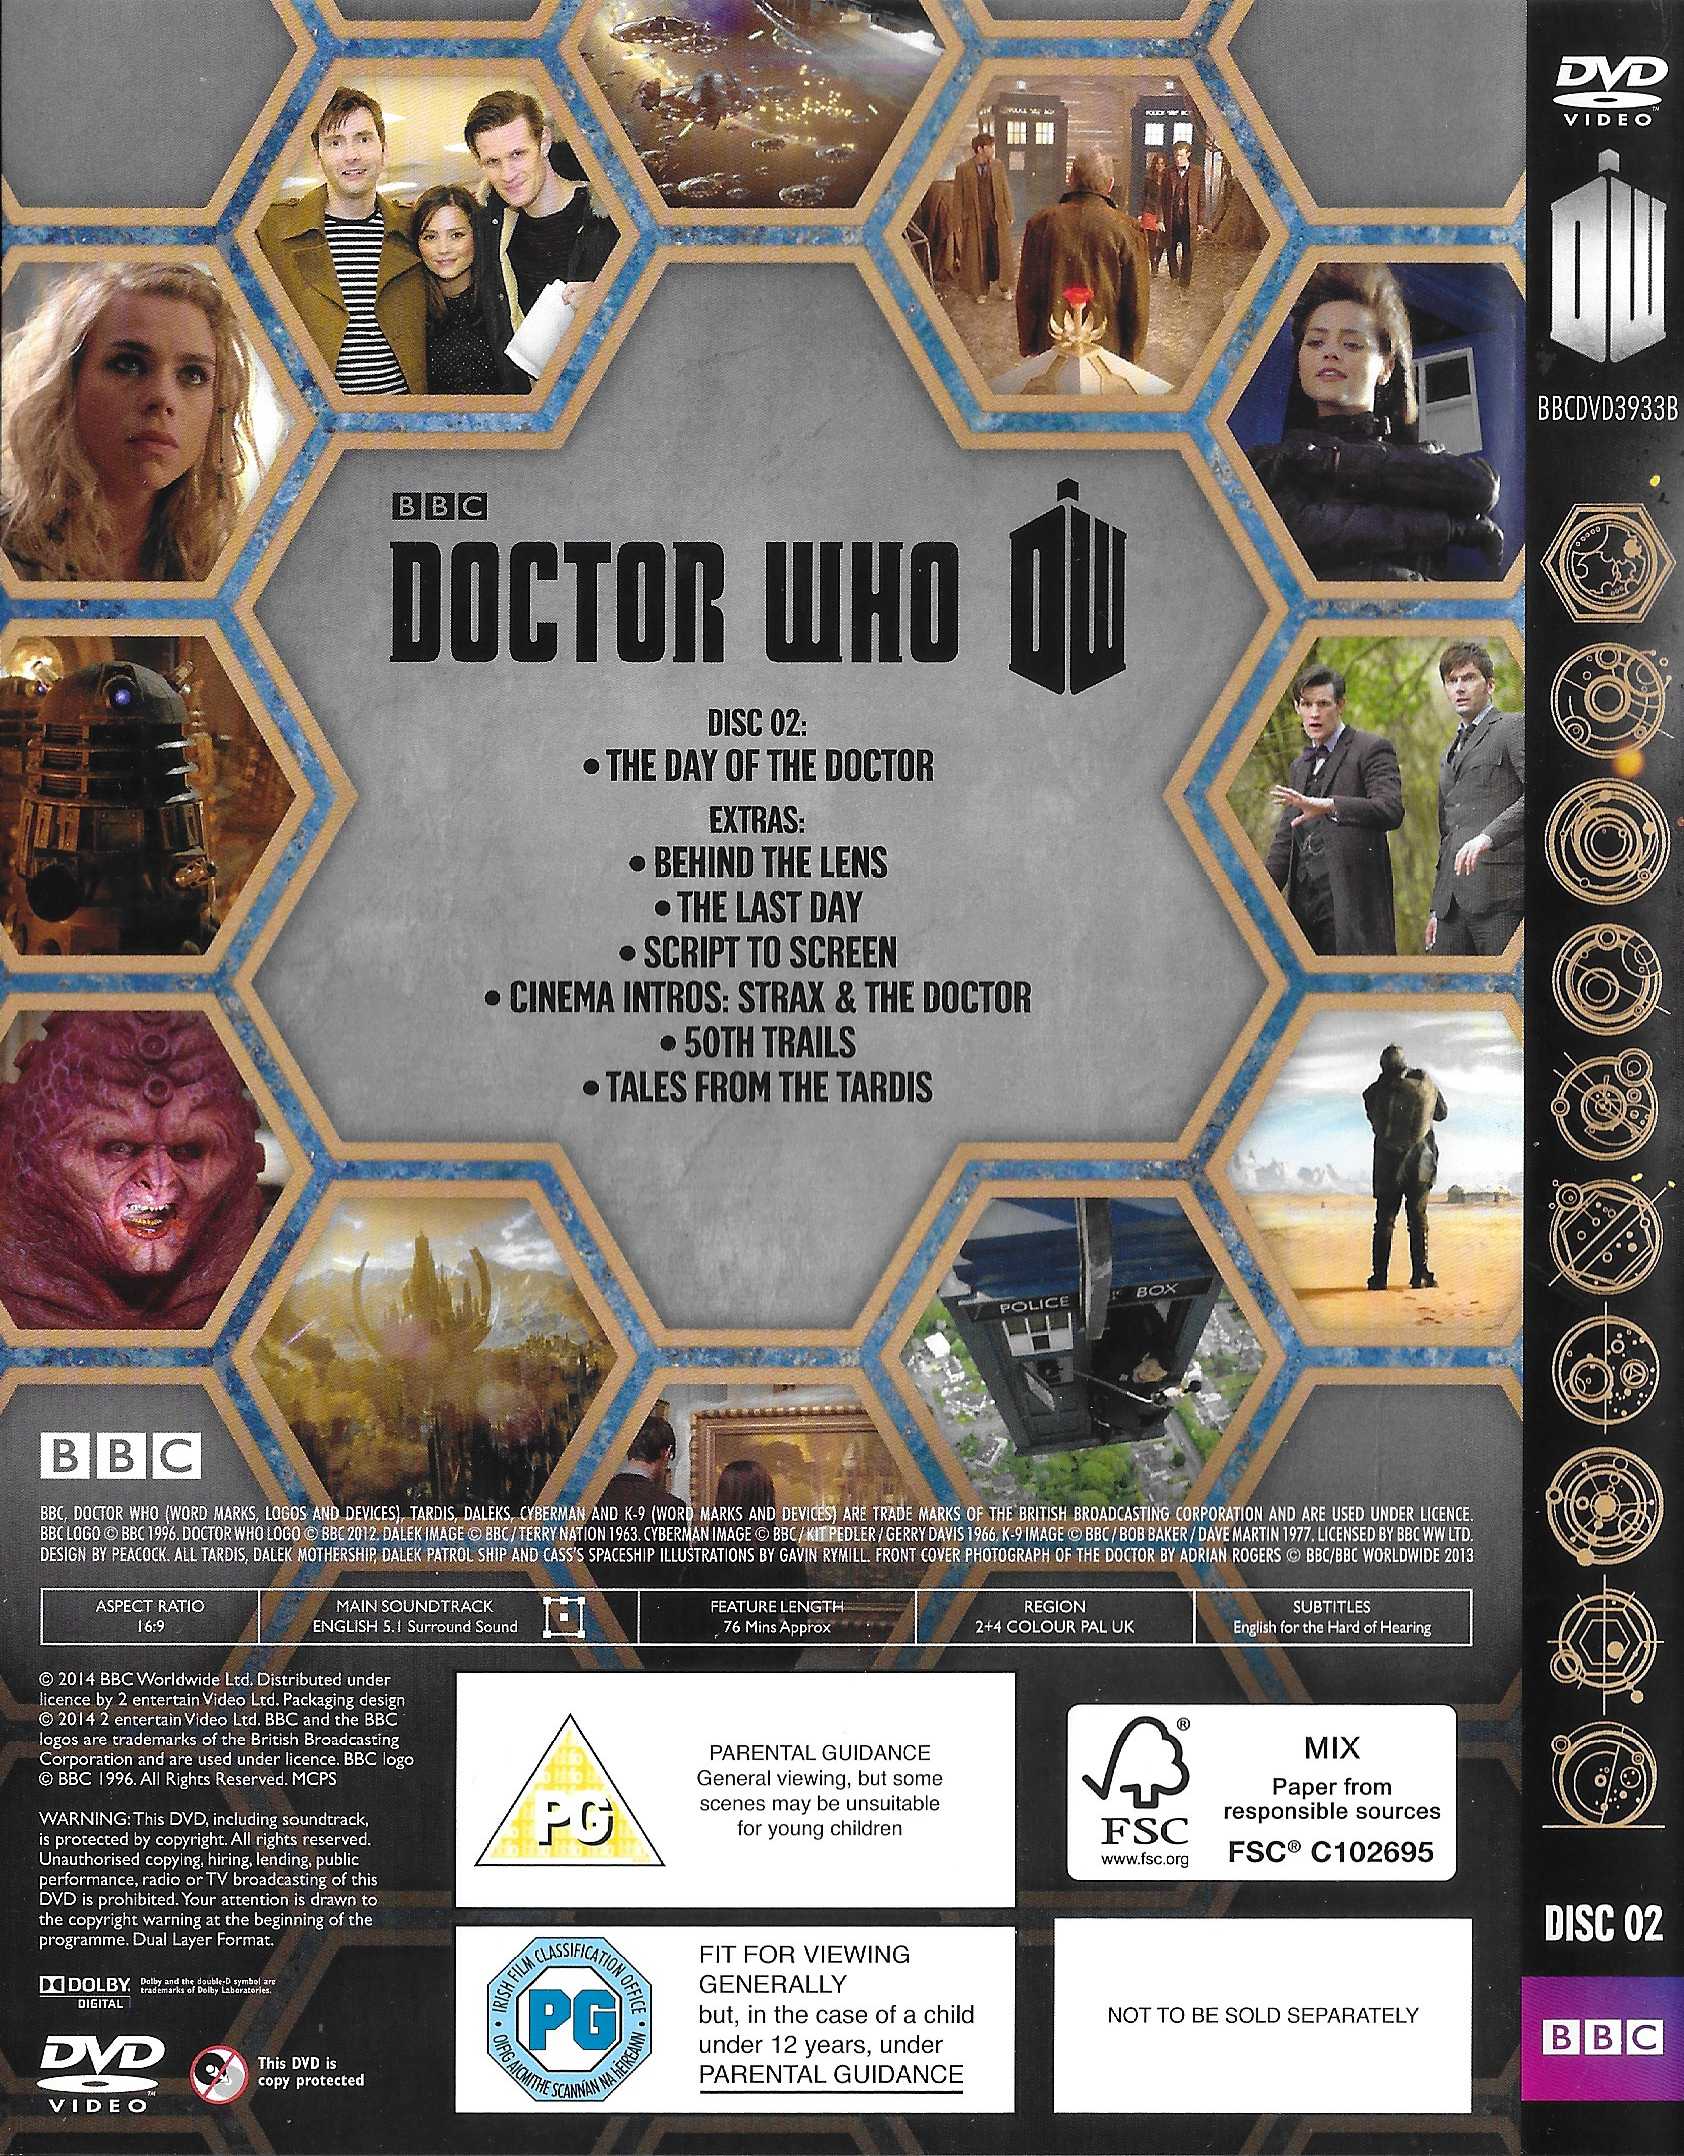 Picture of BBCDVD 3933 02 Doctor Who - The day of the Doctor by artist Steven Moffat from the BBC records and Tapes library